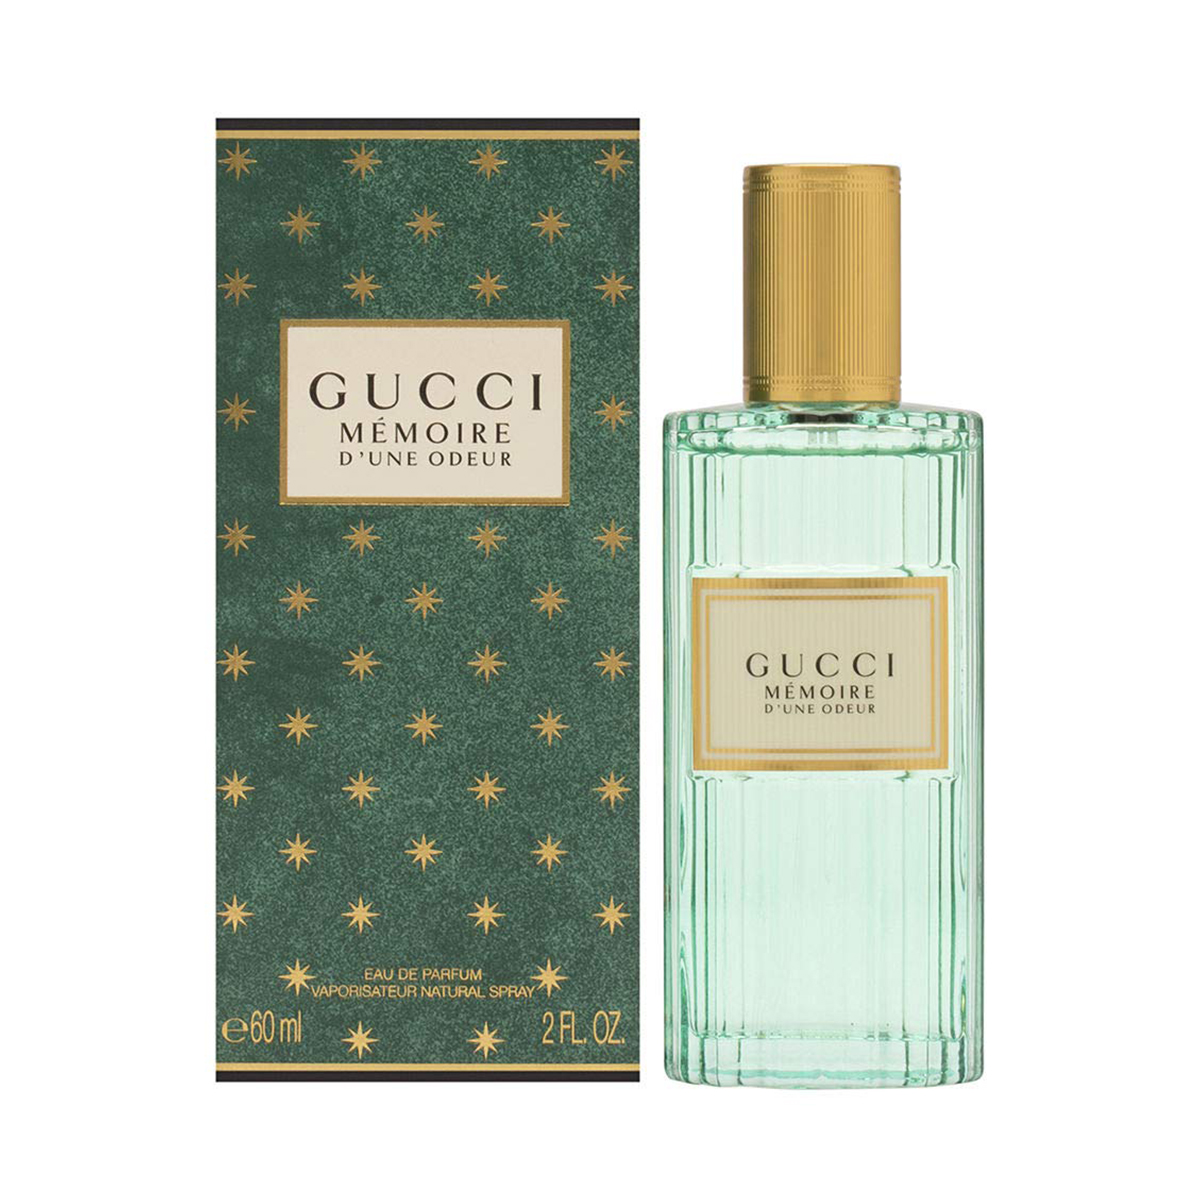 These Are the 10 Best Gucci Perfumes 